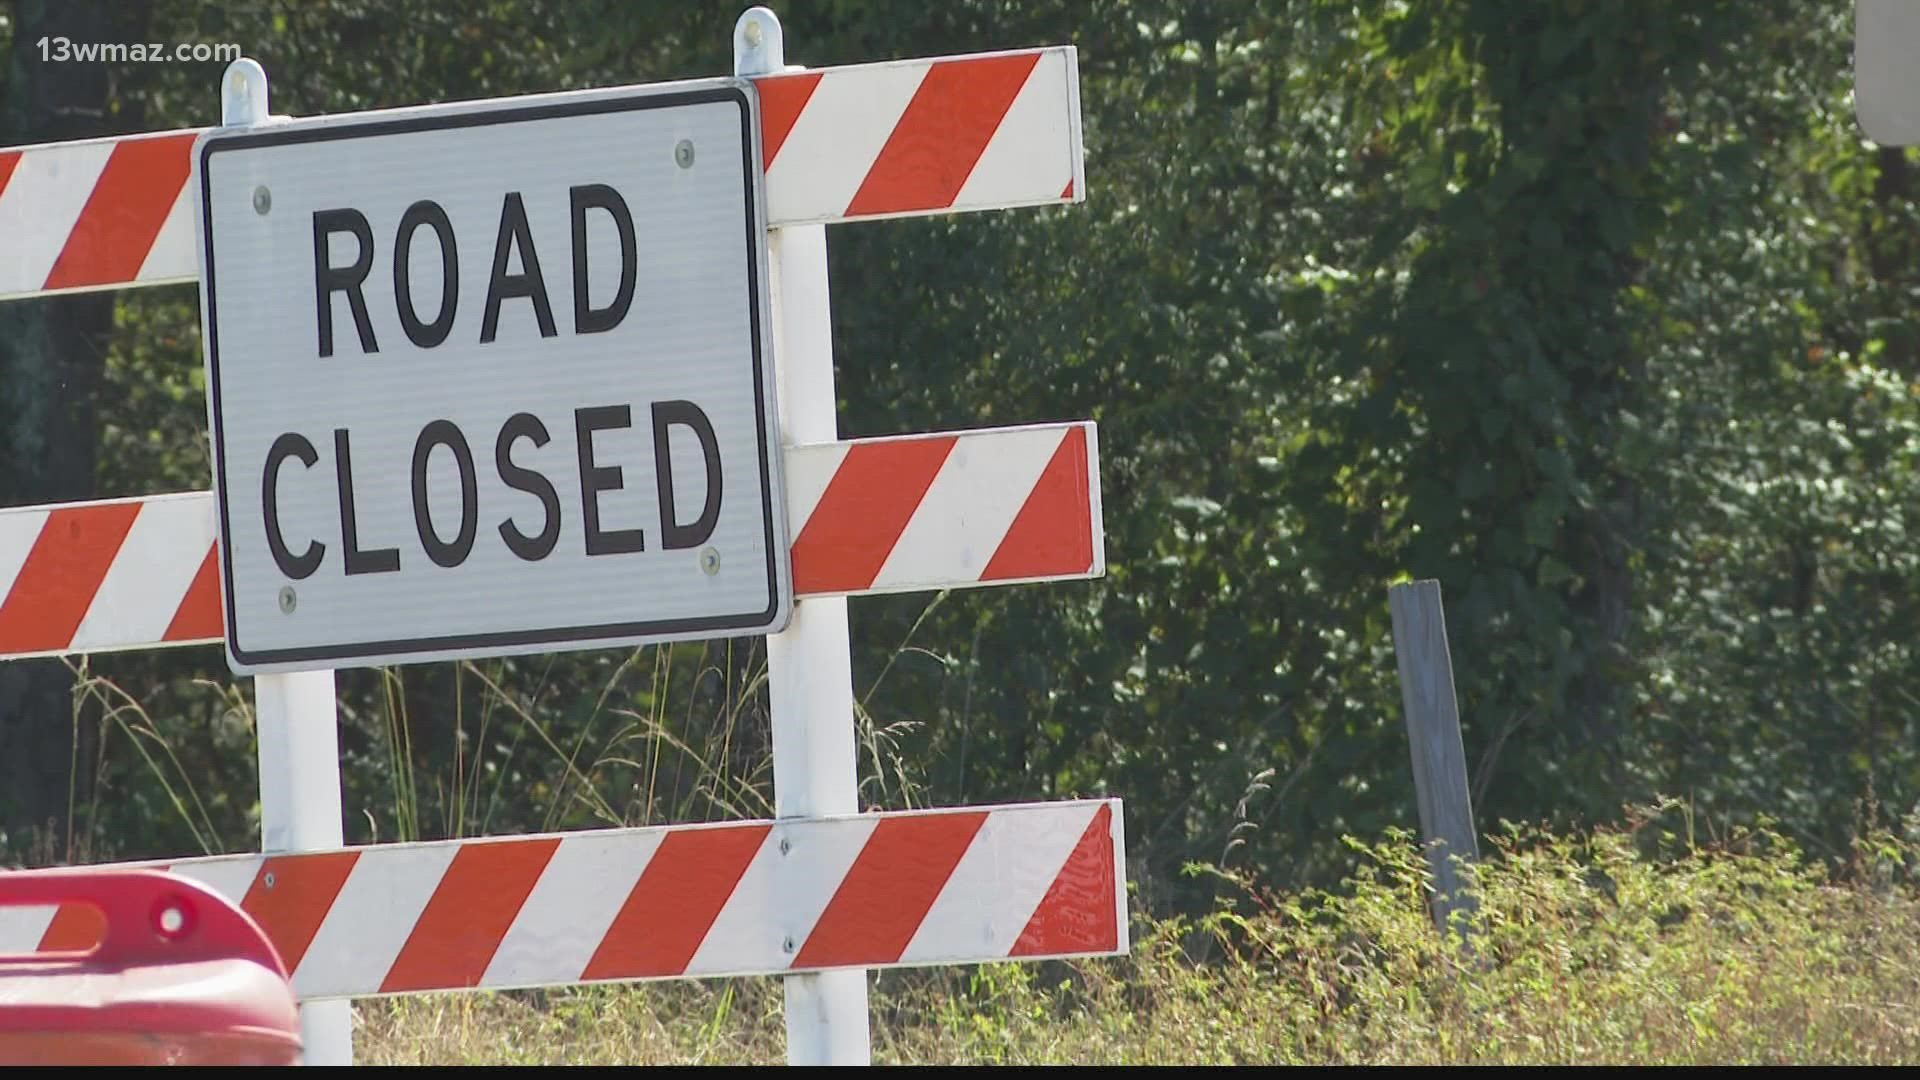 Lane closings on 247 have now turned into a complete closing, and GDOT has put several detours in place you need to know